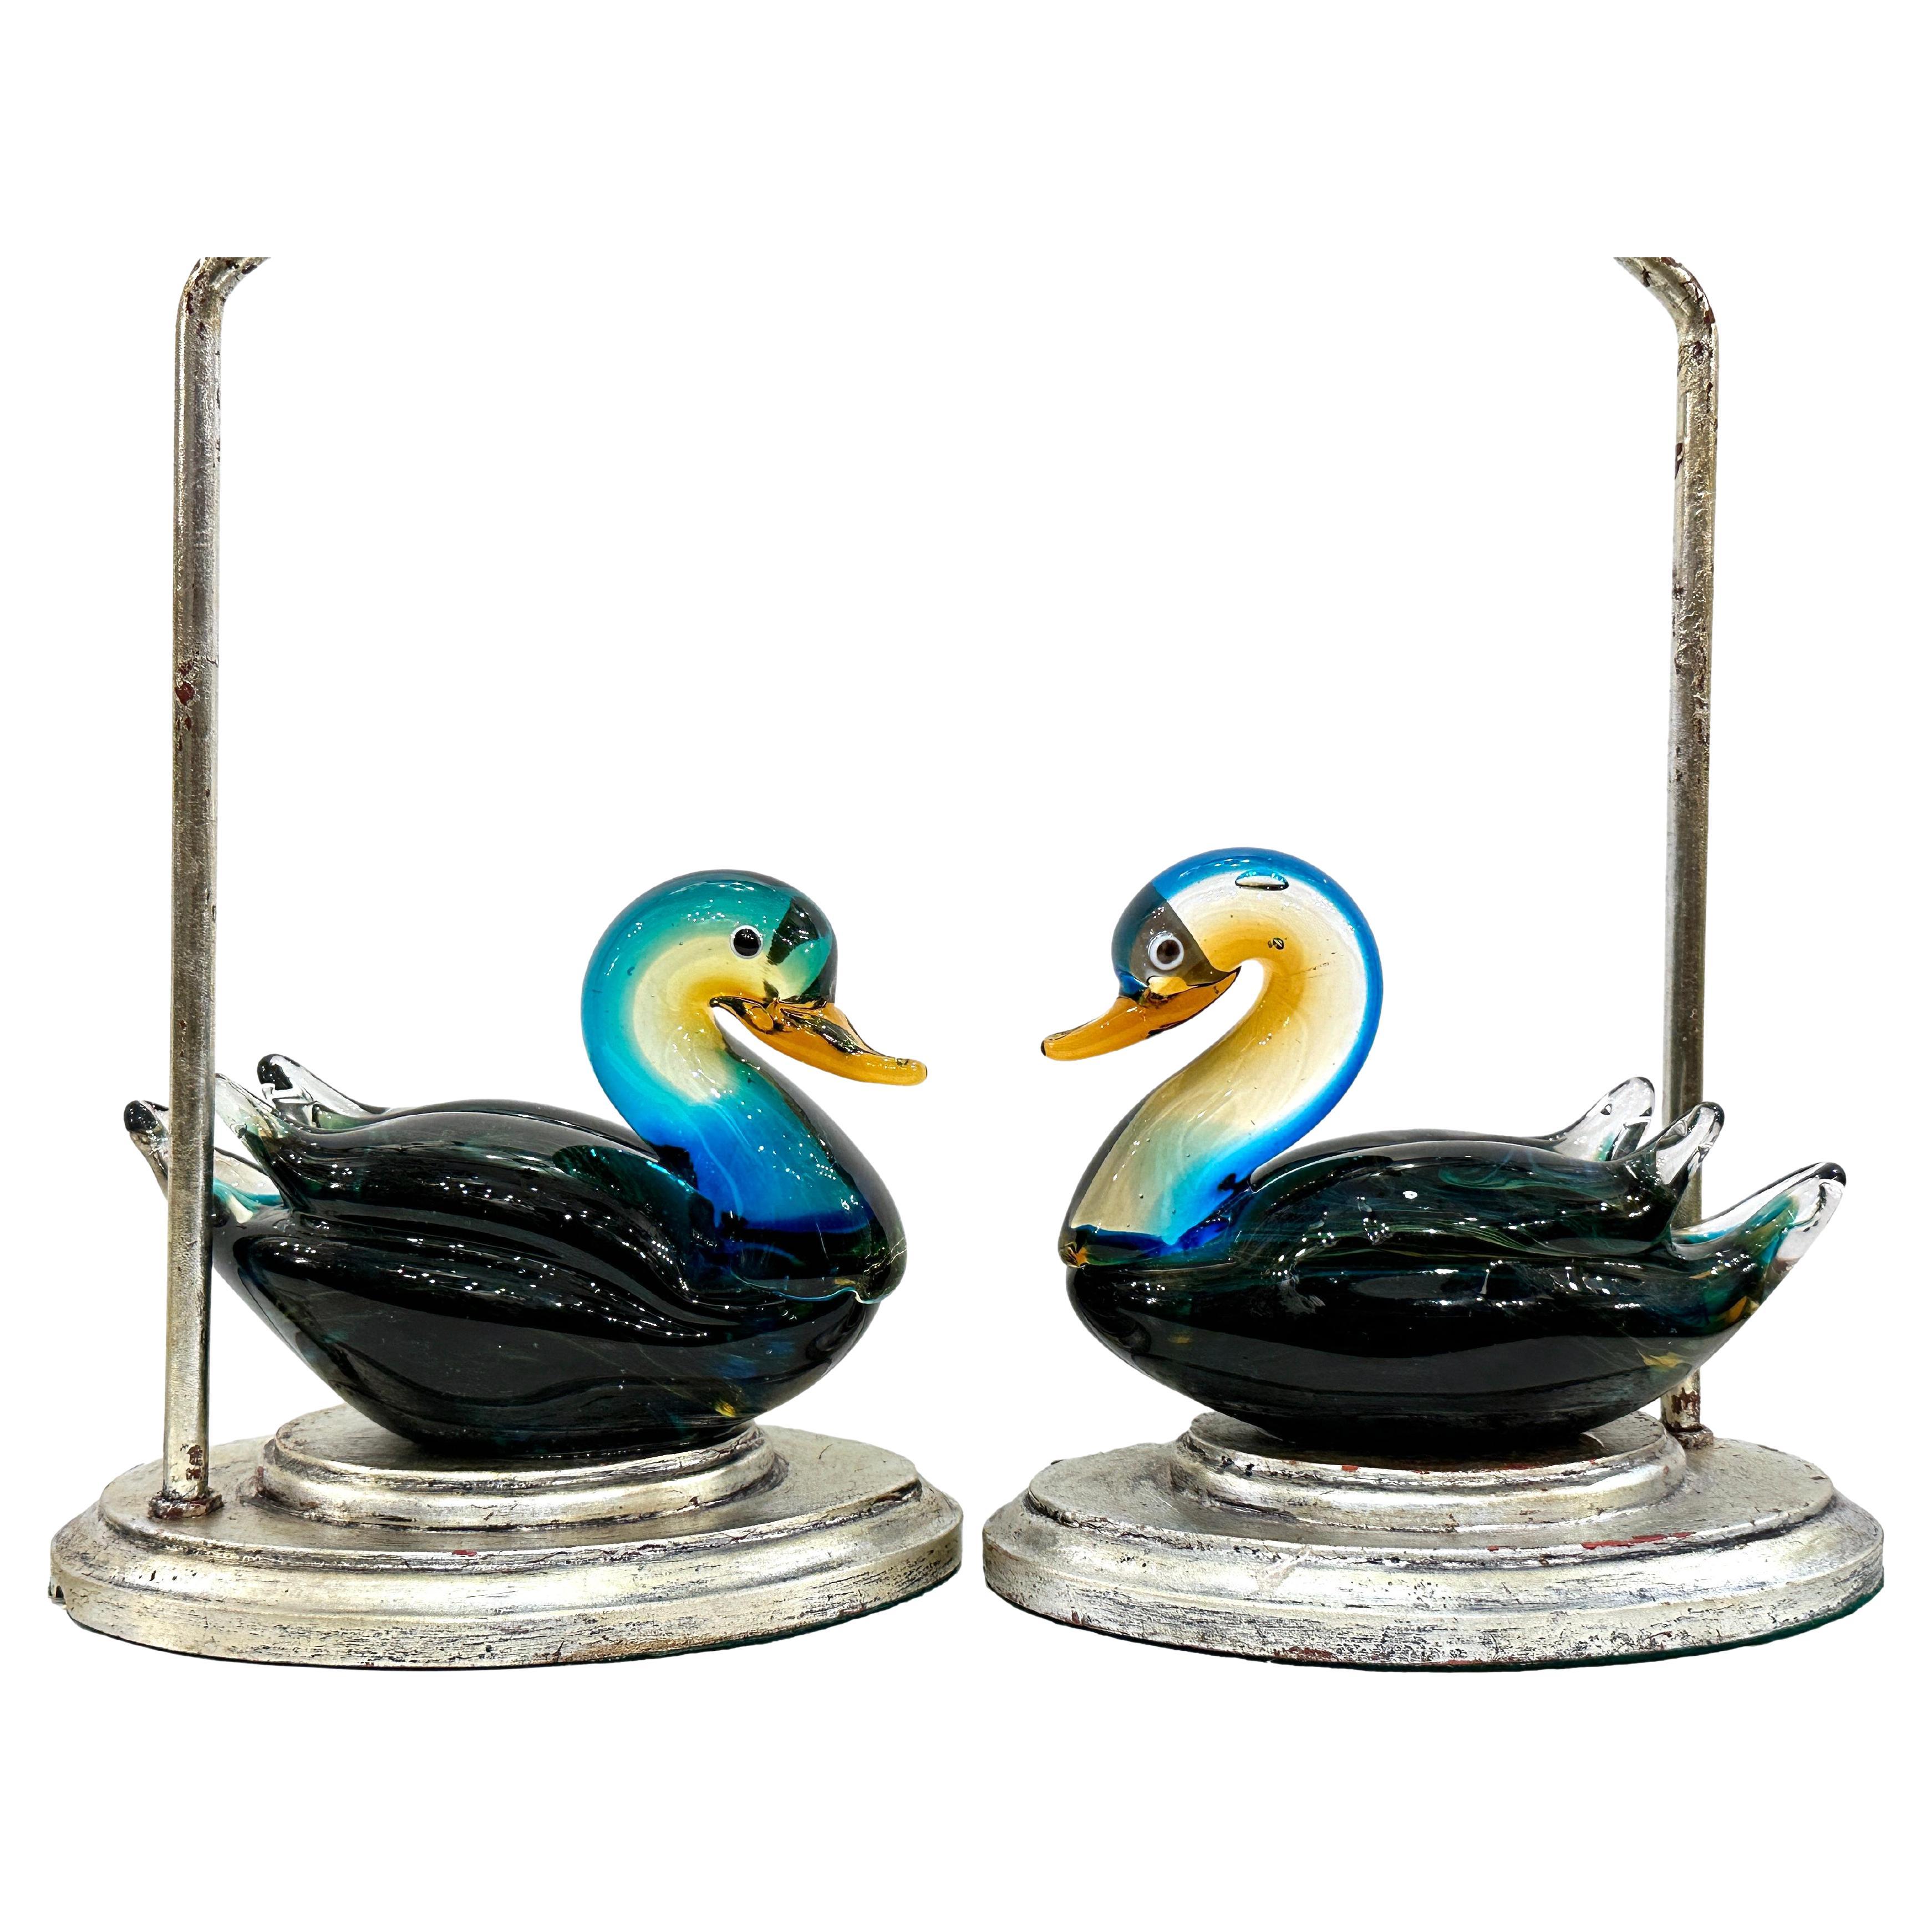 A set of 4 circa 1950's Italian blown glass ducks mounted as lamps, with silver-leafed bases. Sold in pairs.

Measurements:
Height of body: 7